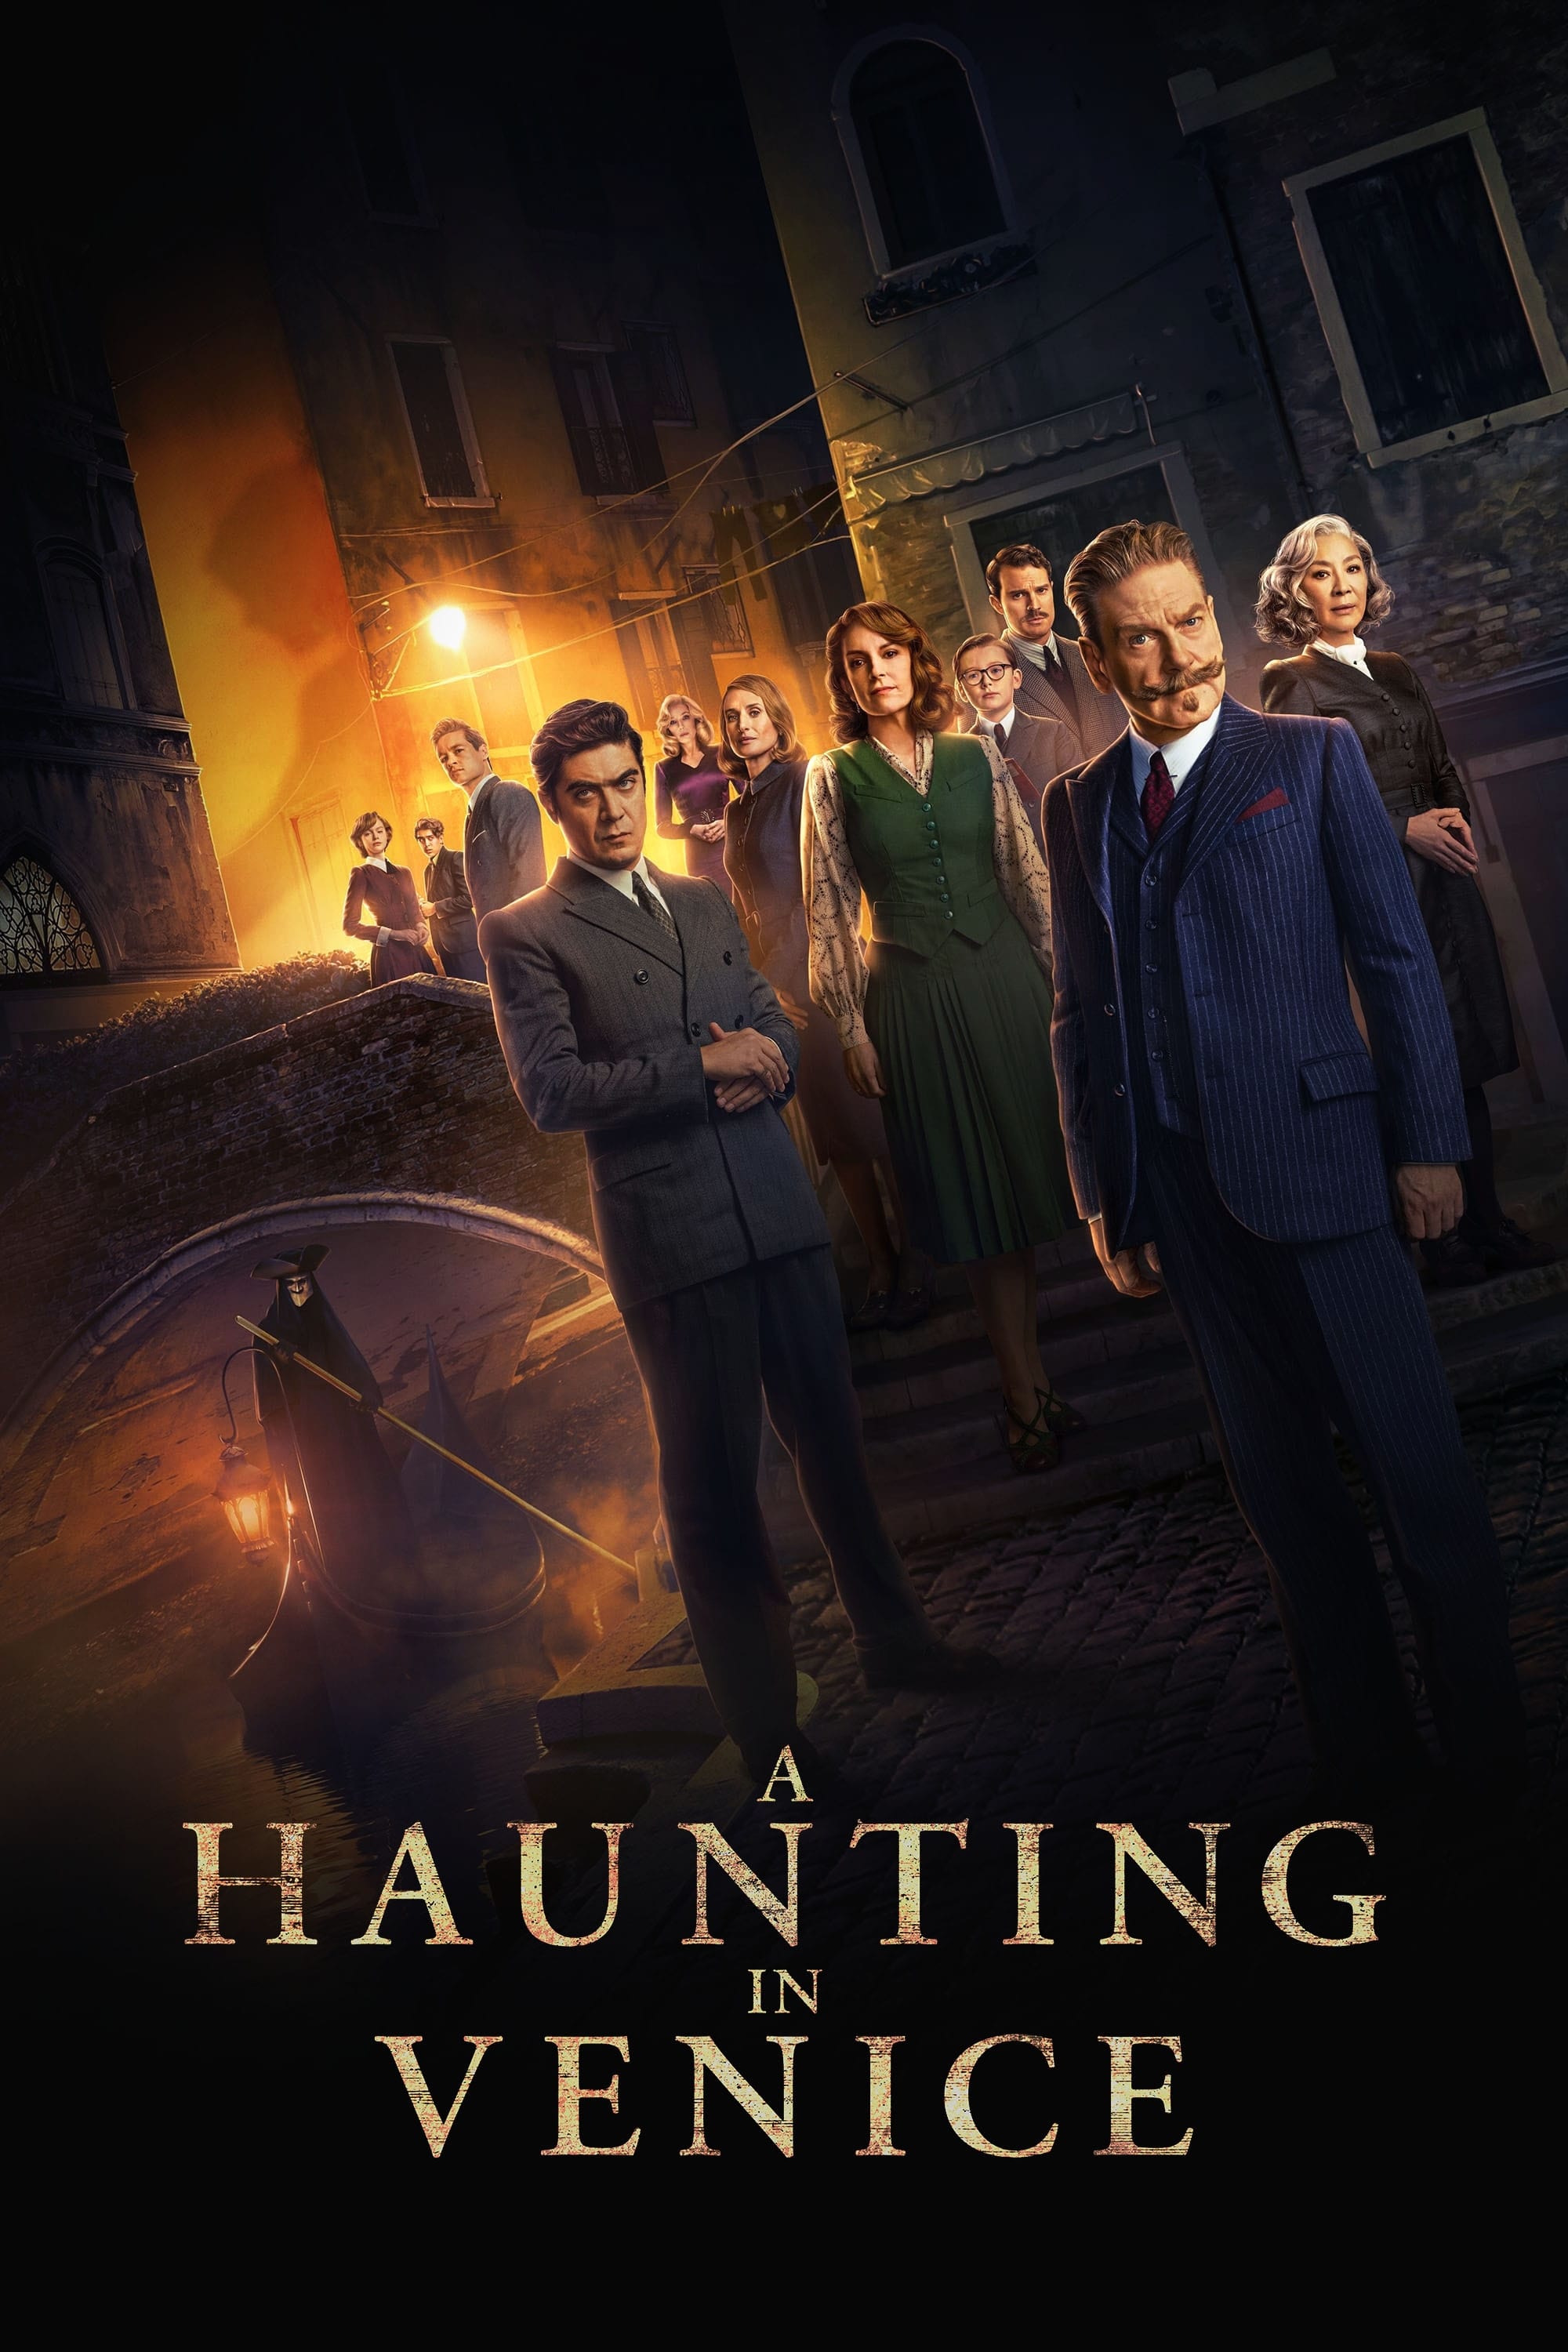 Image for movie A Haunting in Venice